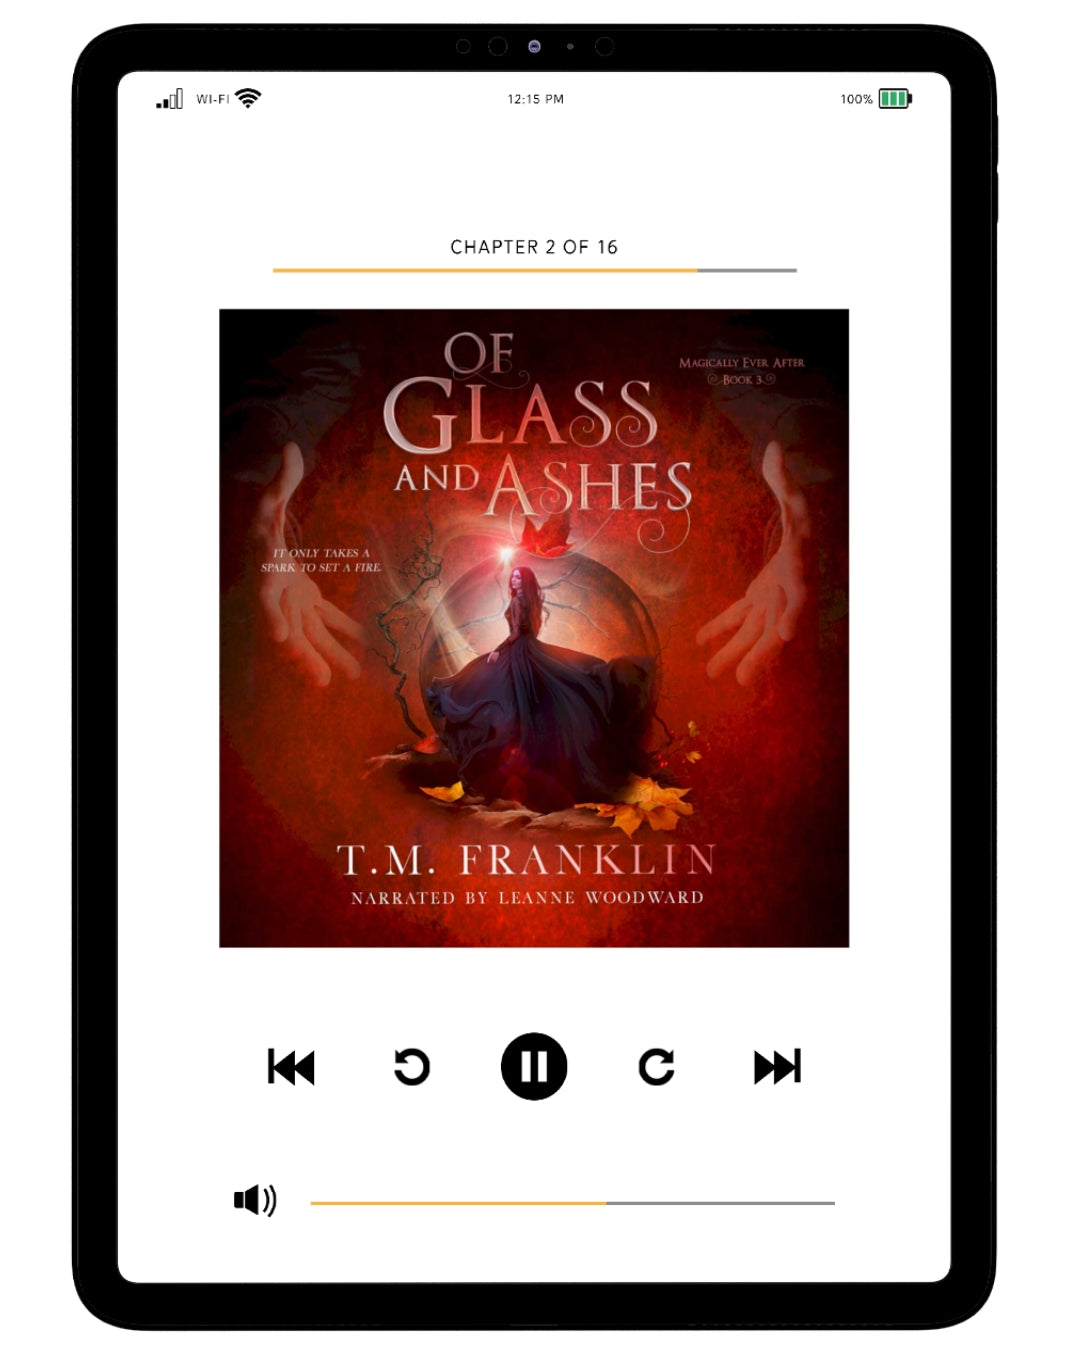 OF GLASS AND ASHES AUDIOBOOK